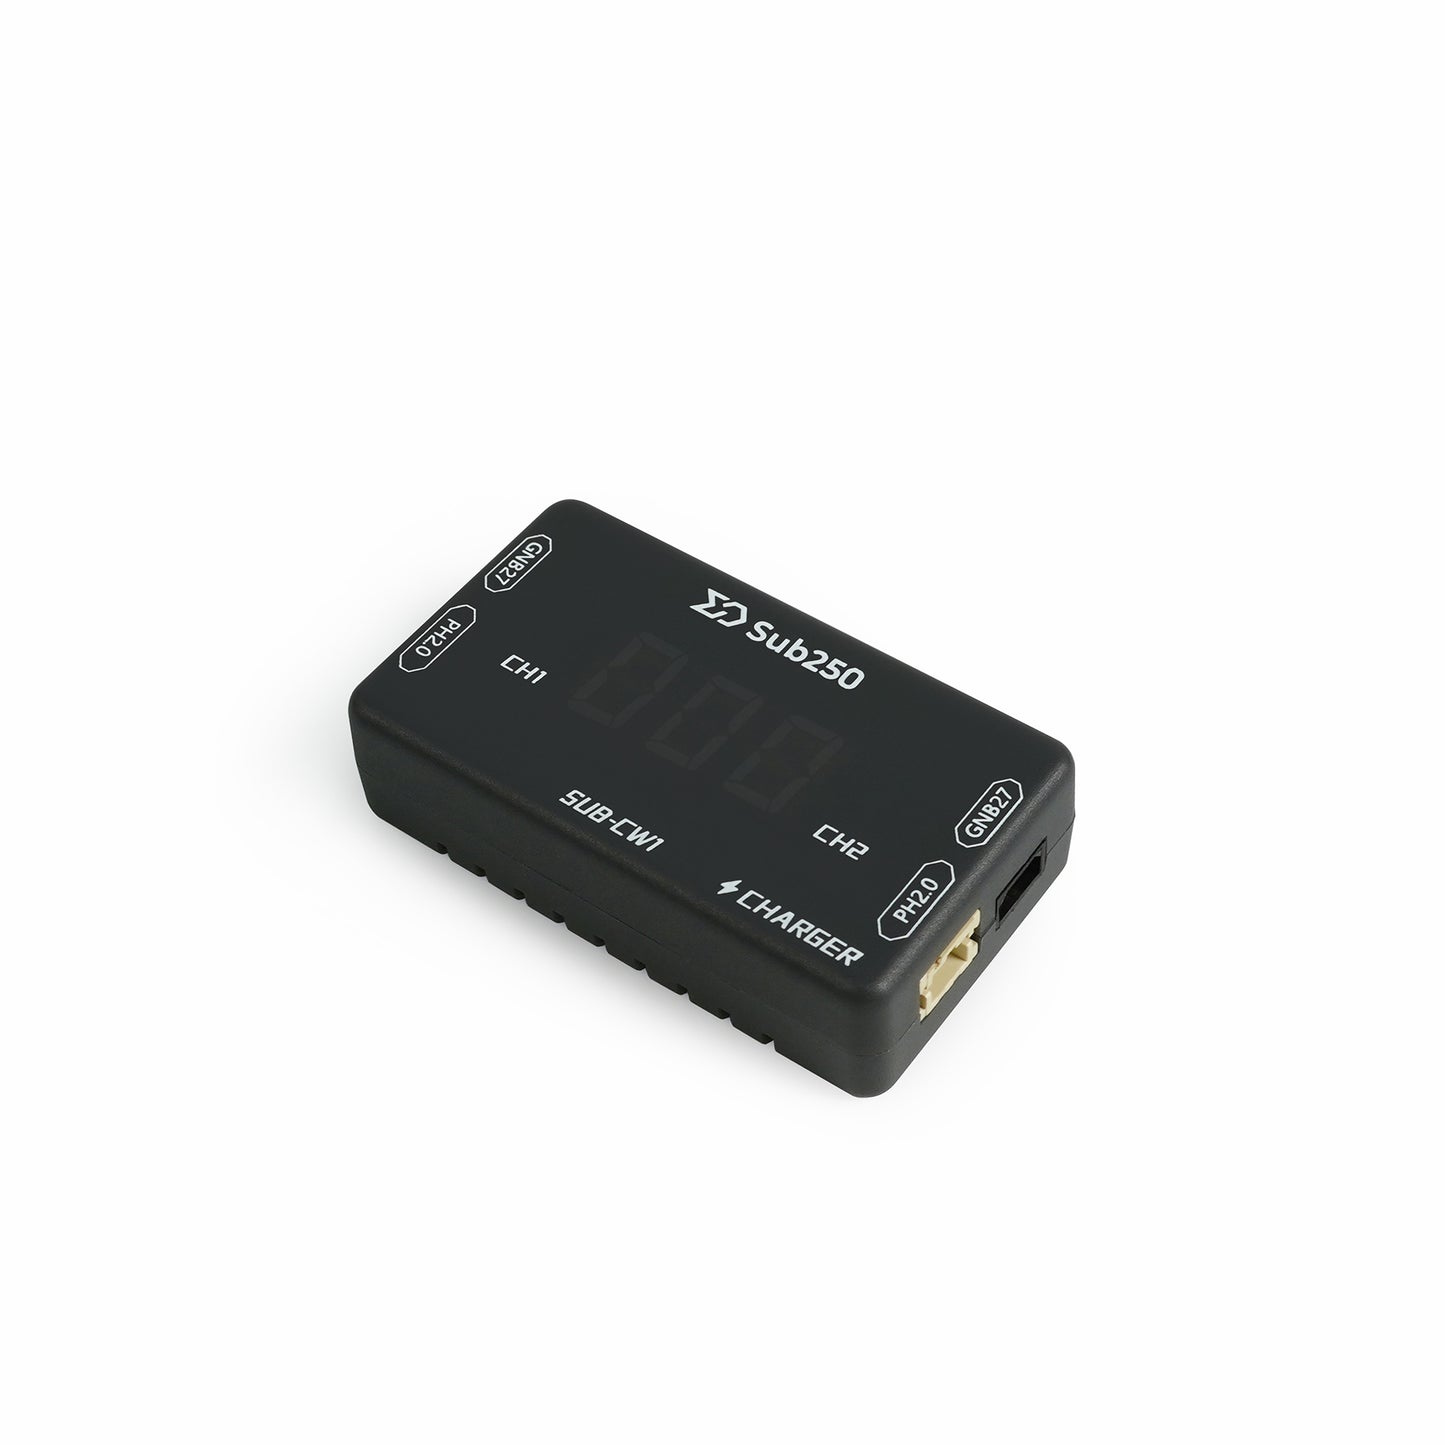 Sub250-CW1 Charger Support for GNB27/A30 and PH2.0 Plugs (Support Battery of Whoofly16 Nanofly16 /Nanofly20)